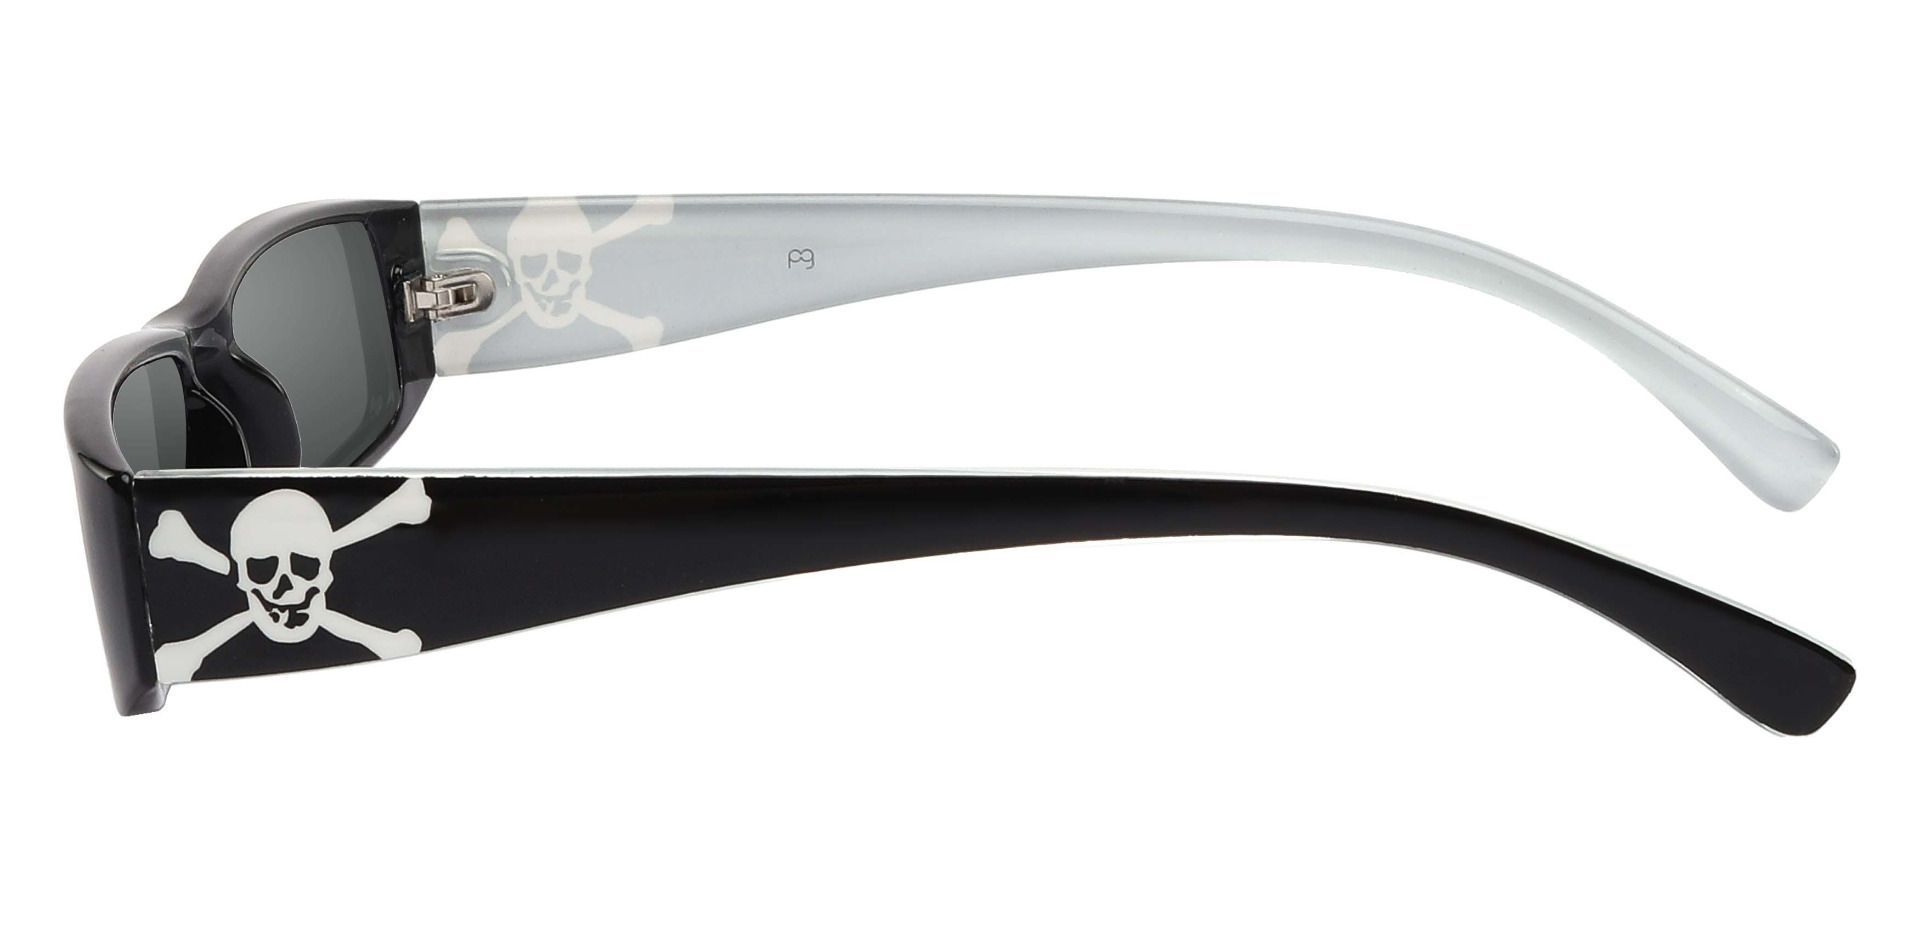 Buccaneer Rectangle Non-Rx Sunglasses - Black Frame With Gray Lenses